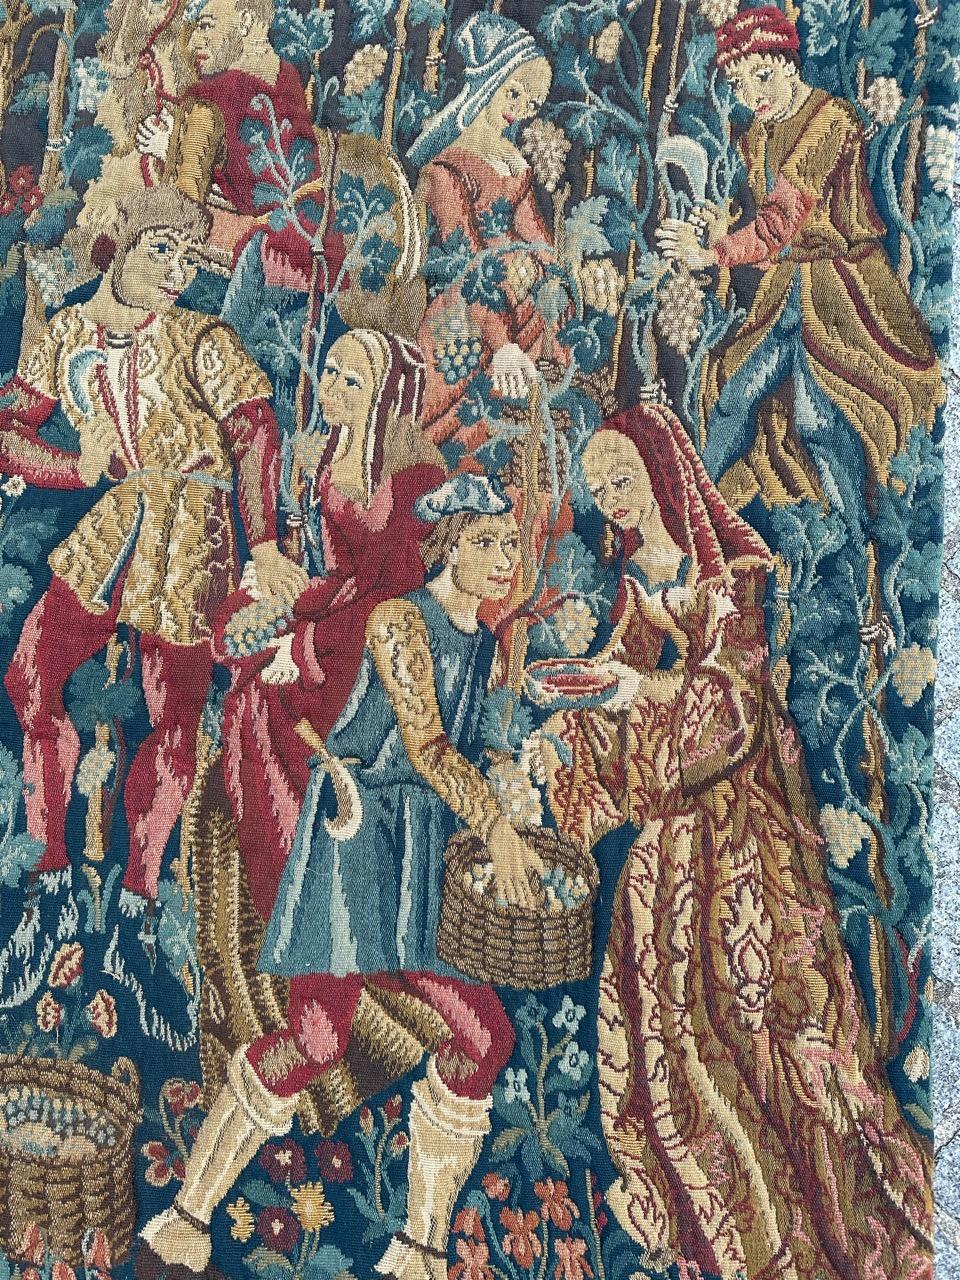 Discover the elegance of this mid-century French Aubusson style tapestry made with wool, by Jacquard looms at Jean LAURENT manufacturing in 1979, featuring the exquisite design of the renowned medieval museum tapestry, 